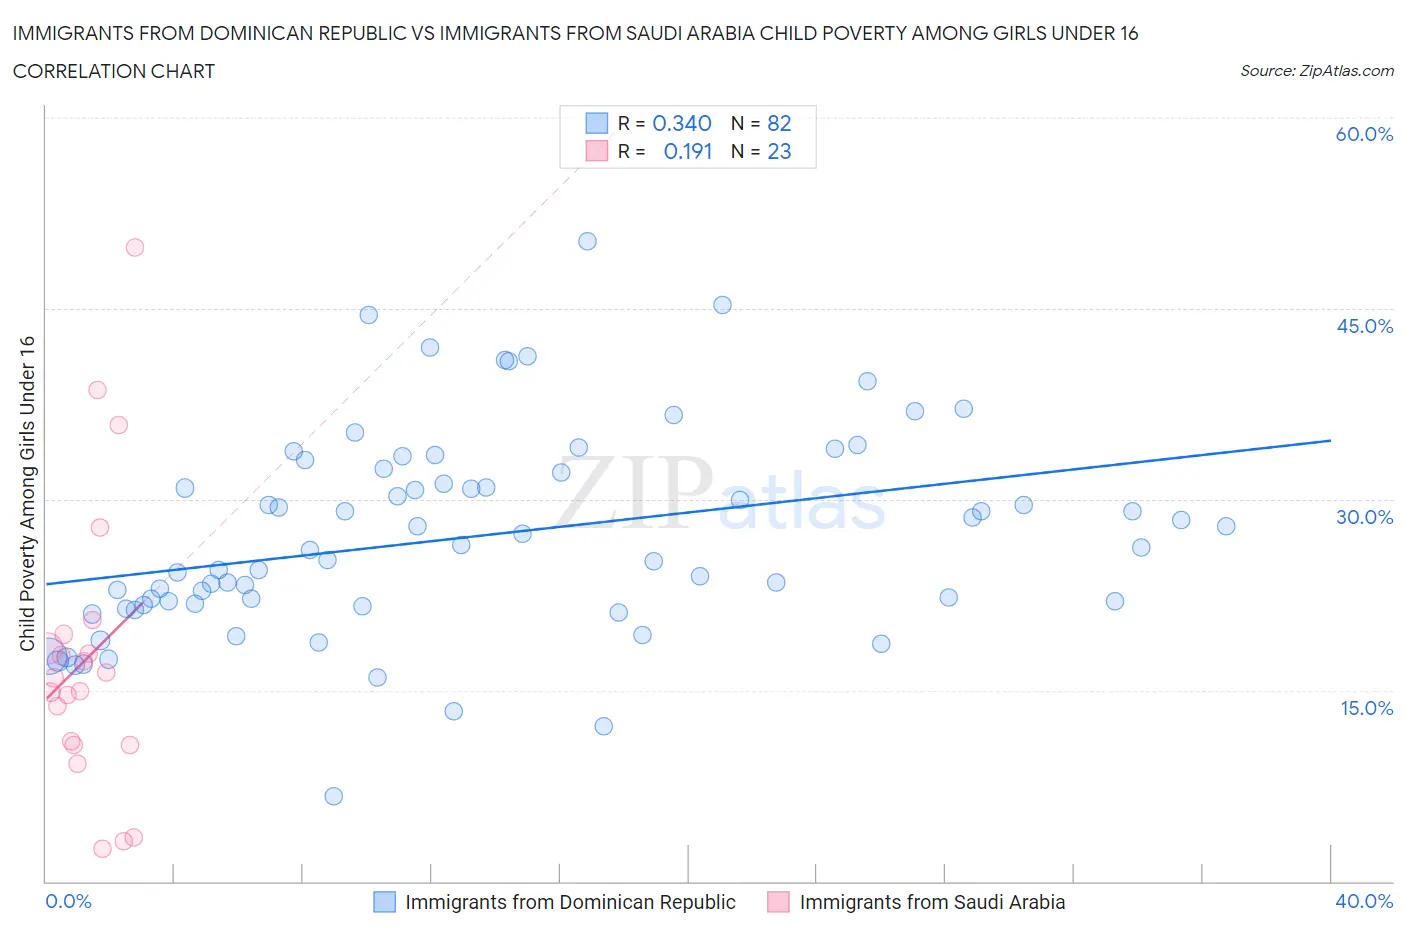 Immigrants from Dominican Republic vs Immigrants from Saudi Arabia Child Poverty Among Girls Under 16